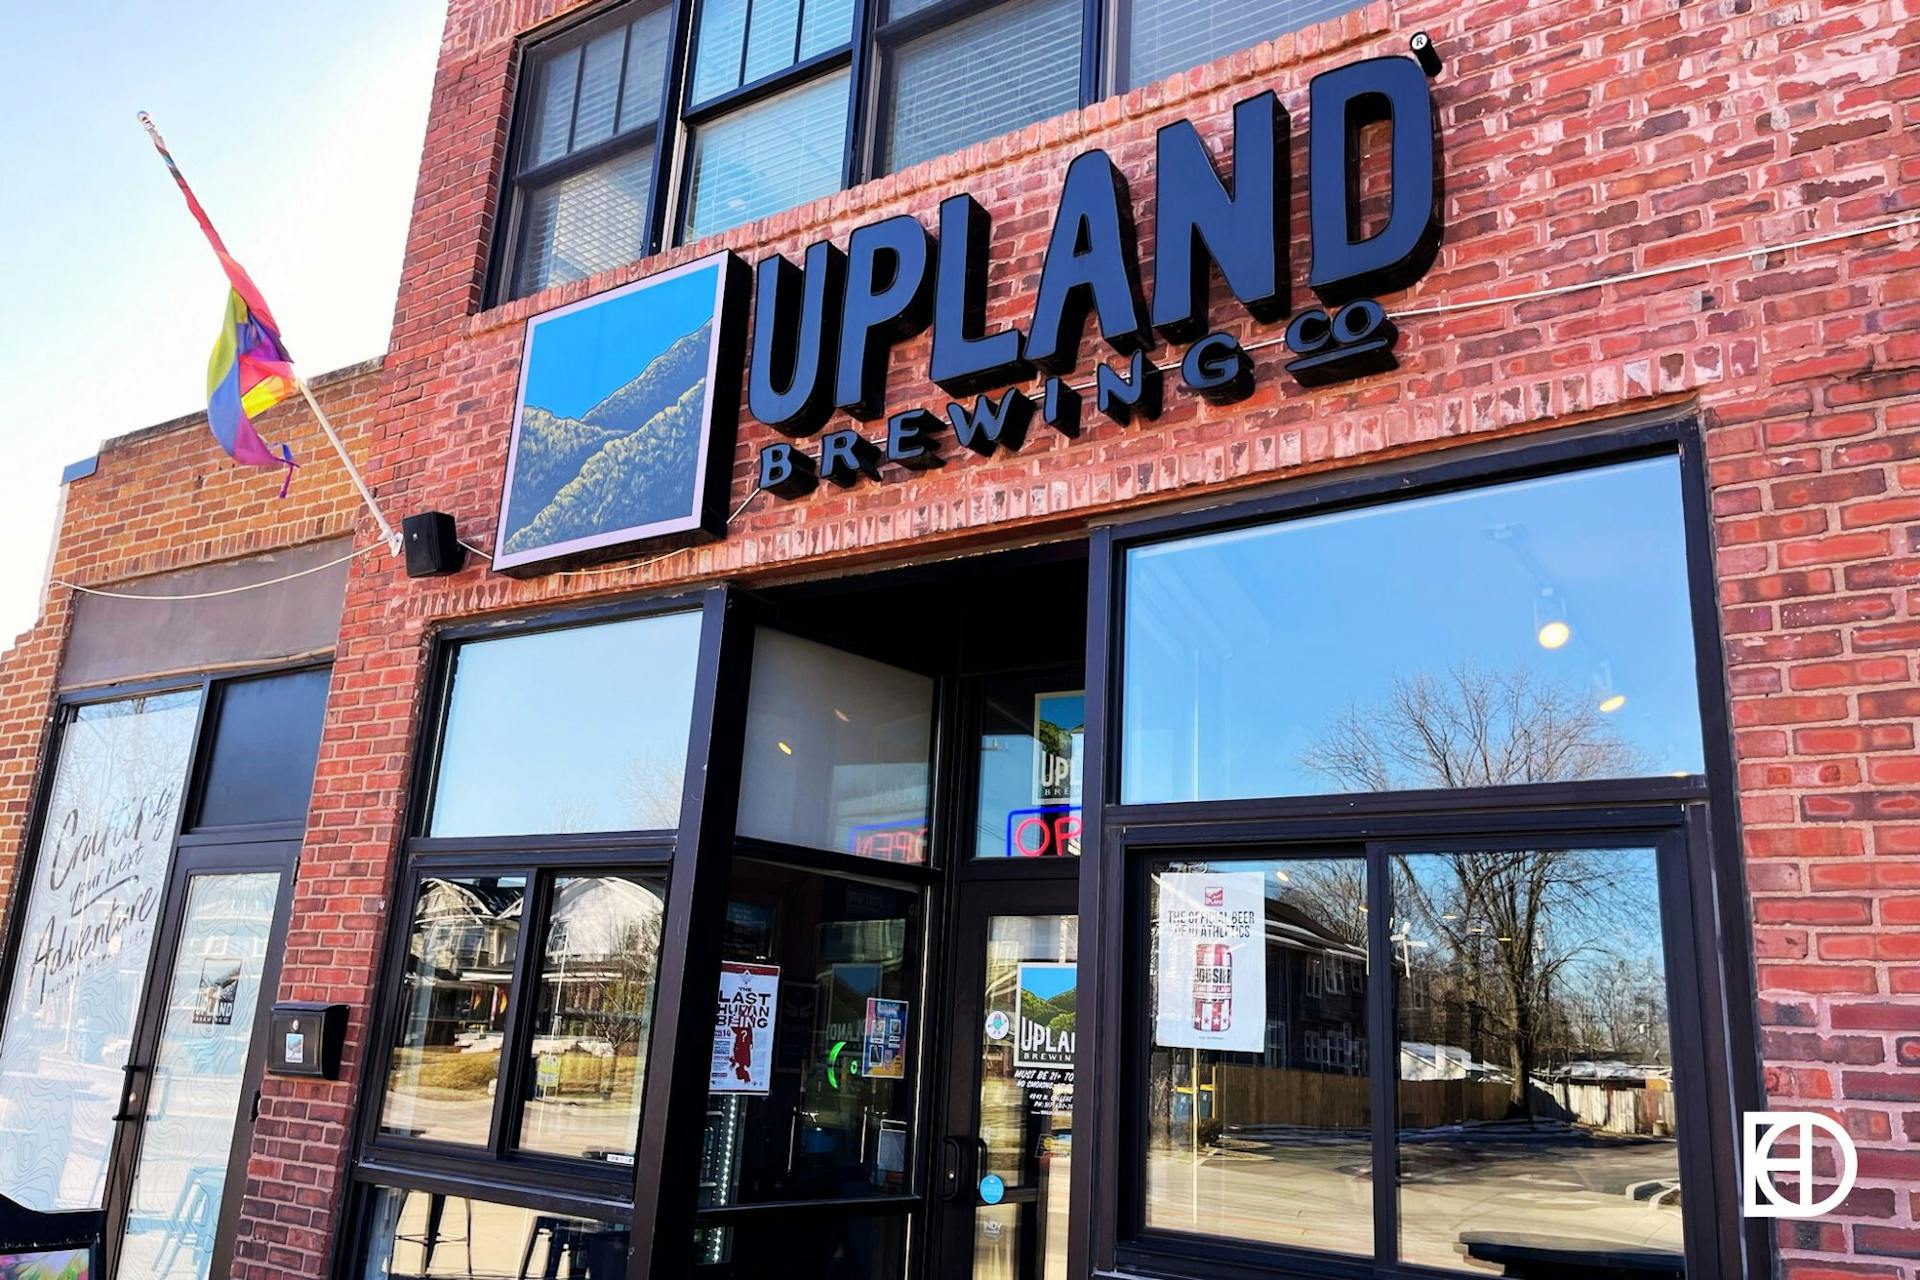 Exterior photo of Upland College Ave Tasting Room